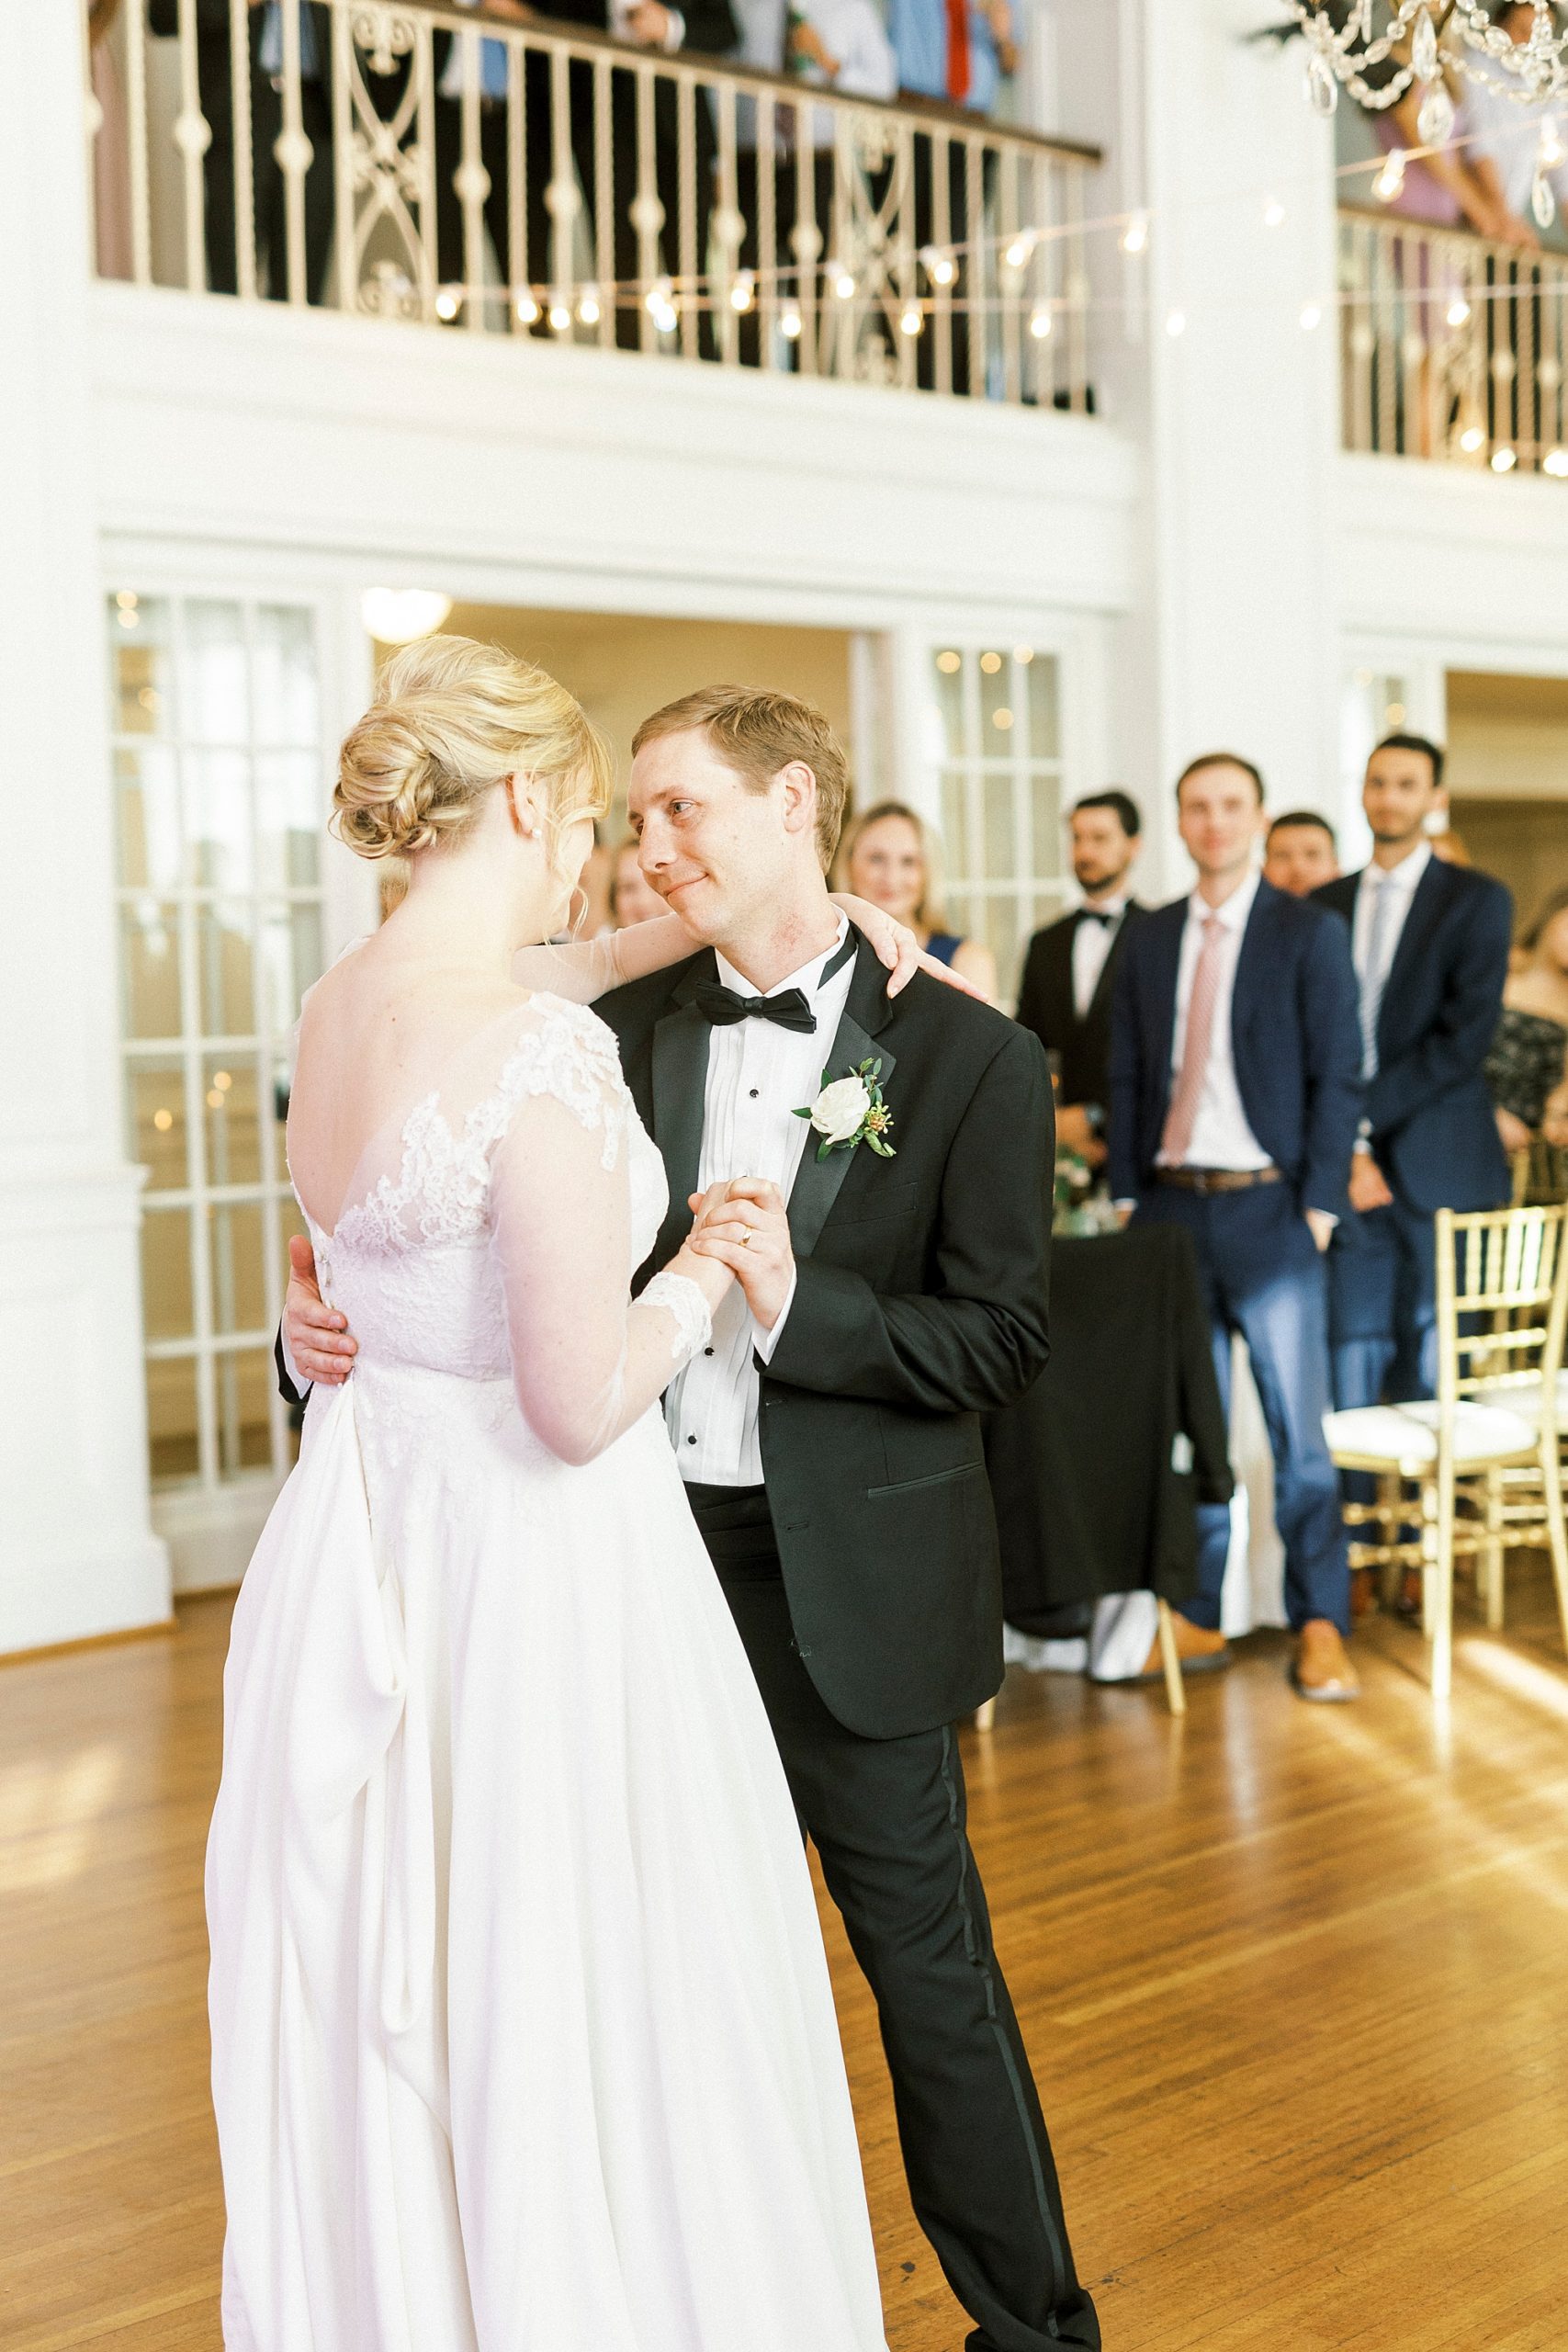 newlyweds' first dance at Concord NC wedding reception